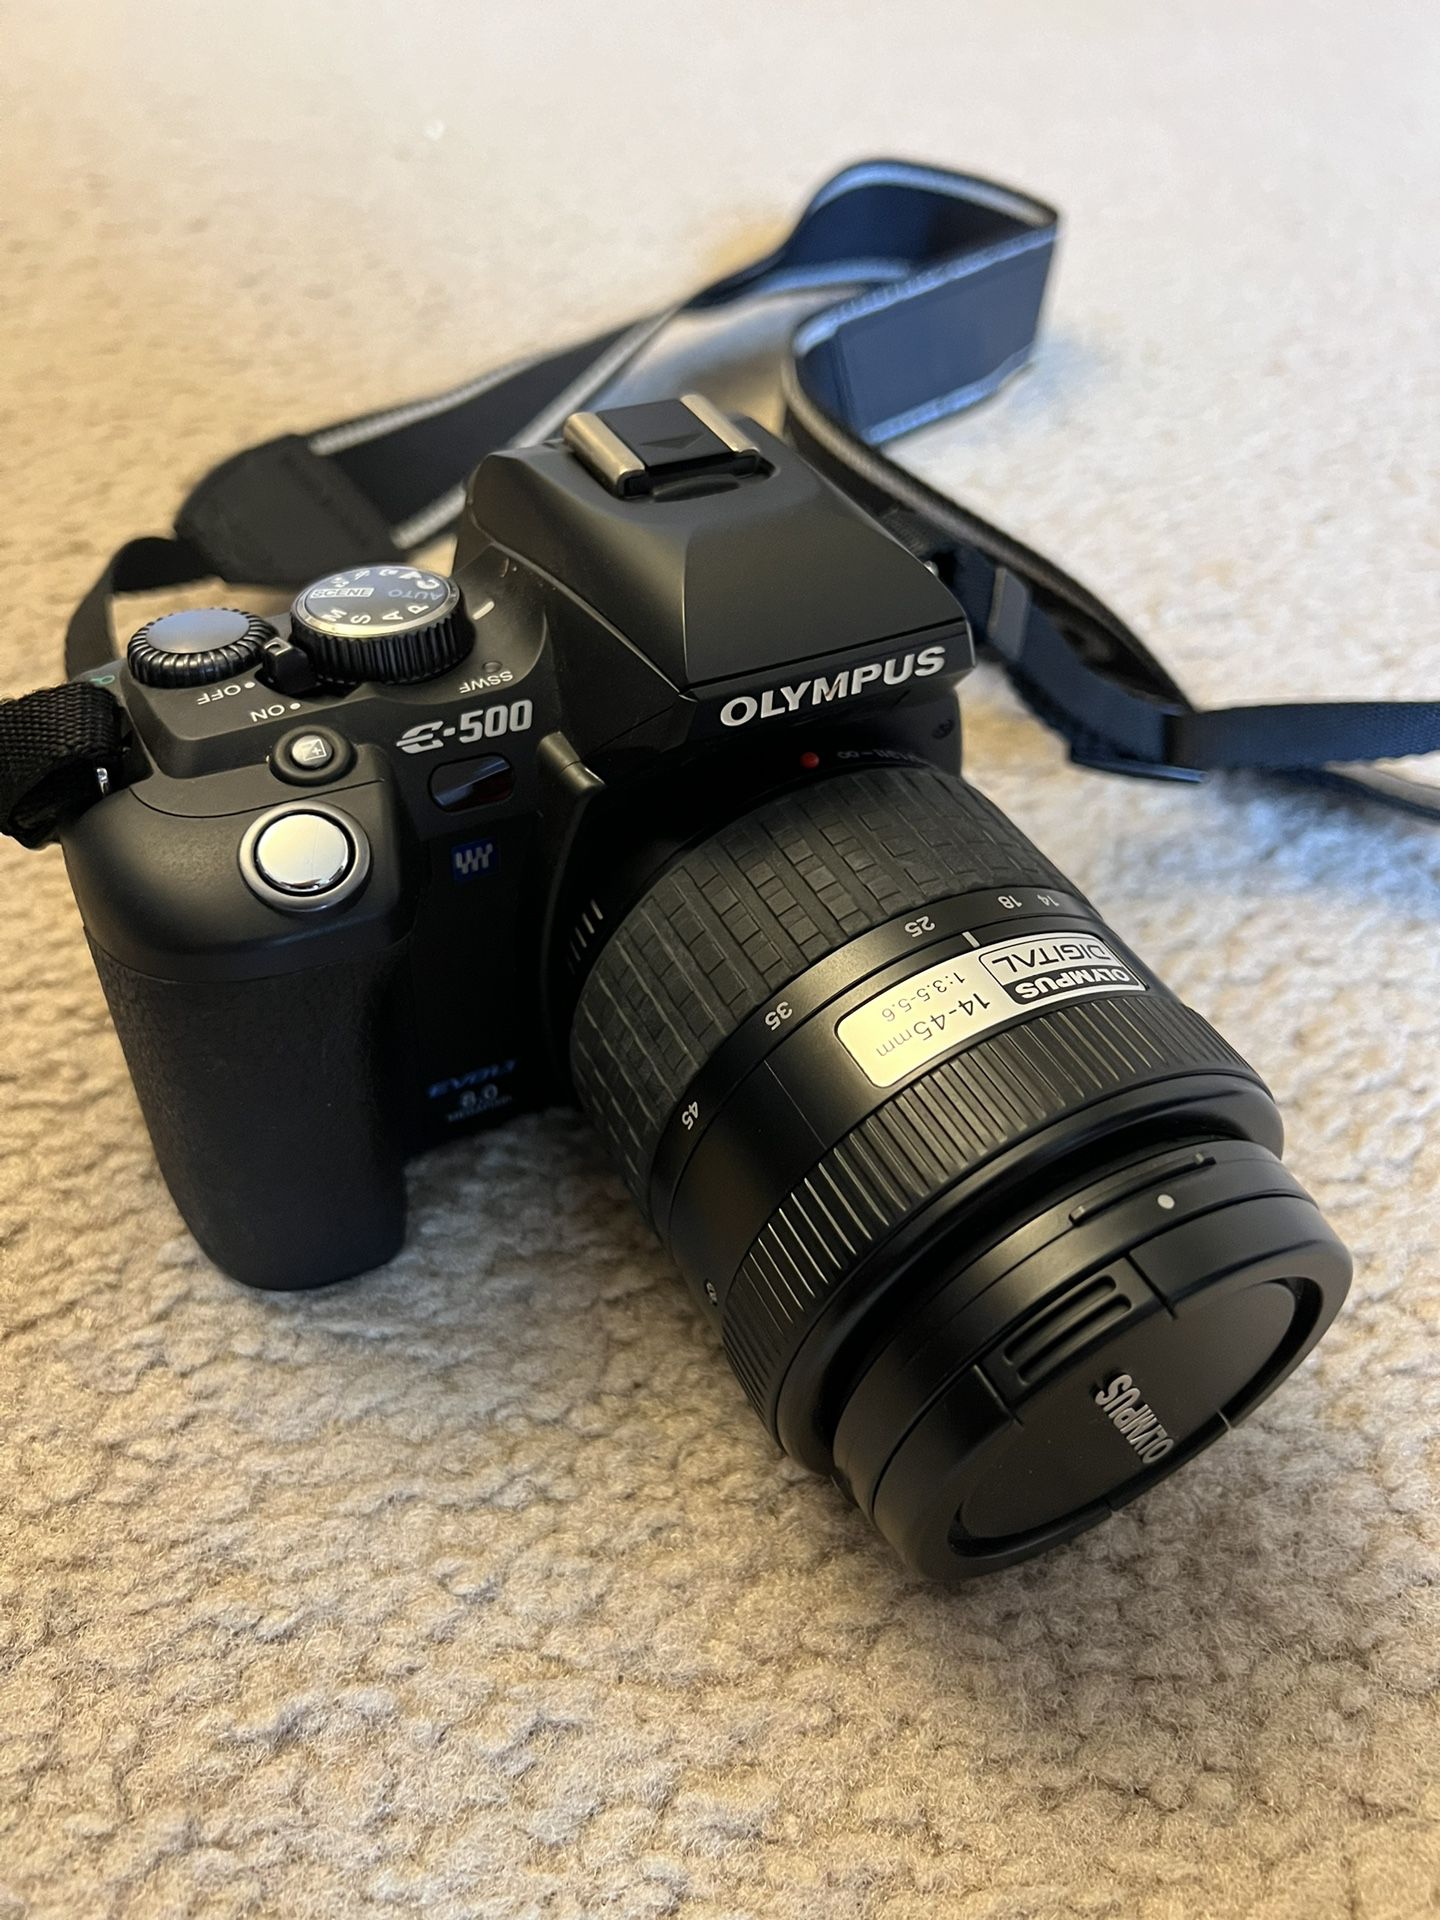 Olympus E-500 Evolt DSLR Camera With 3 Lenses And Case